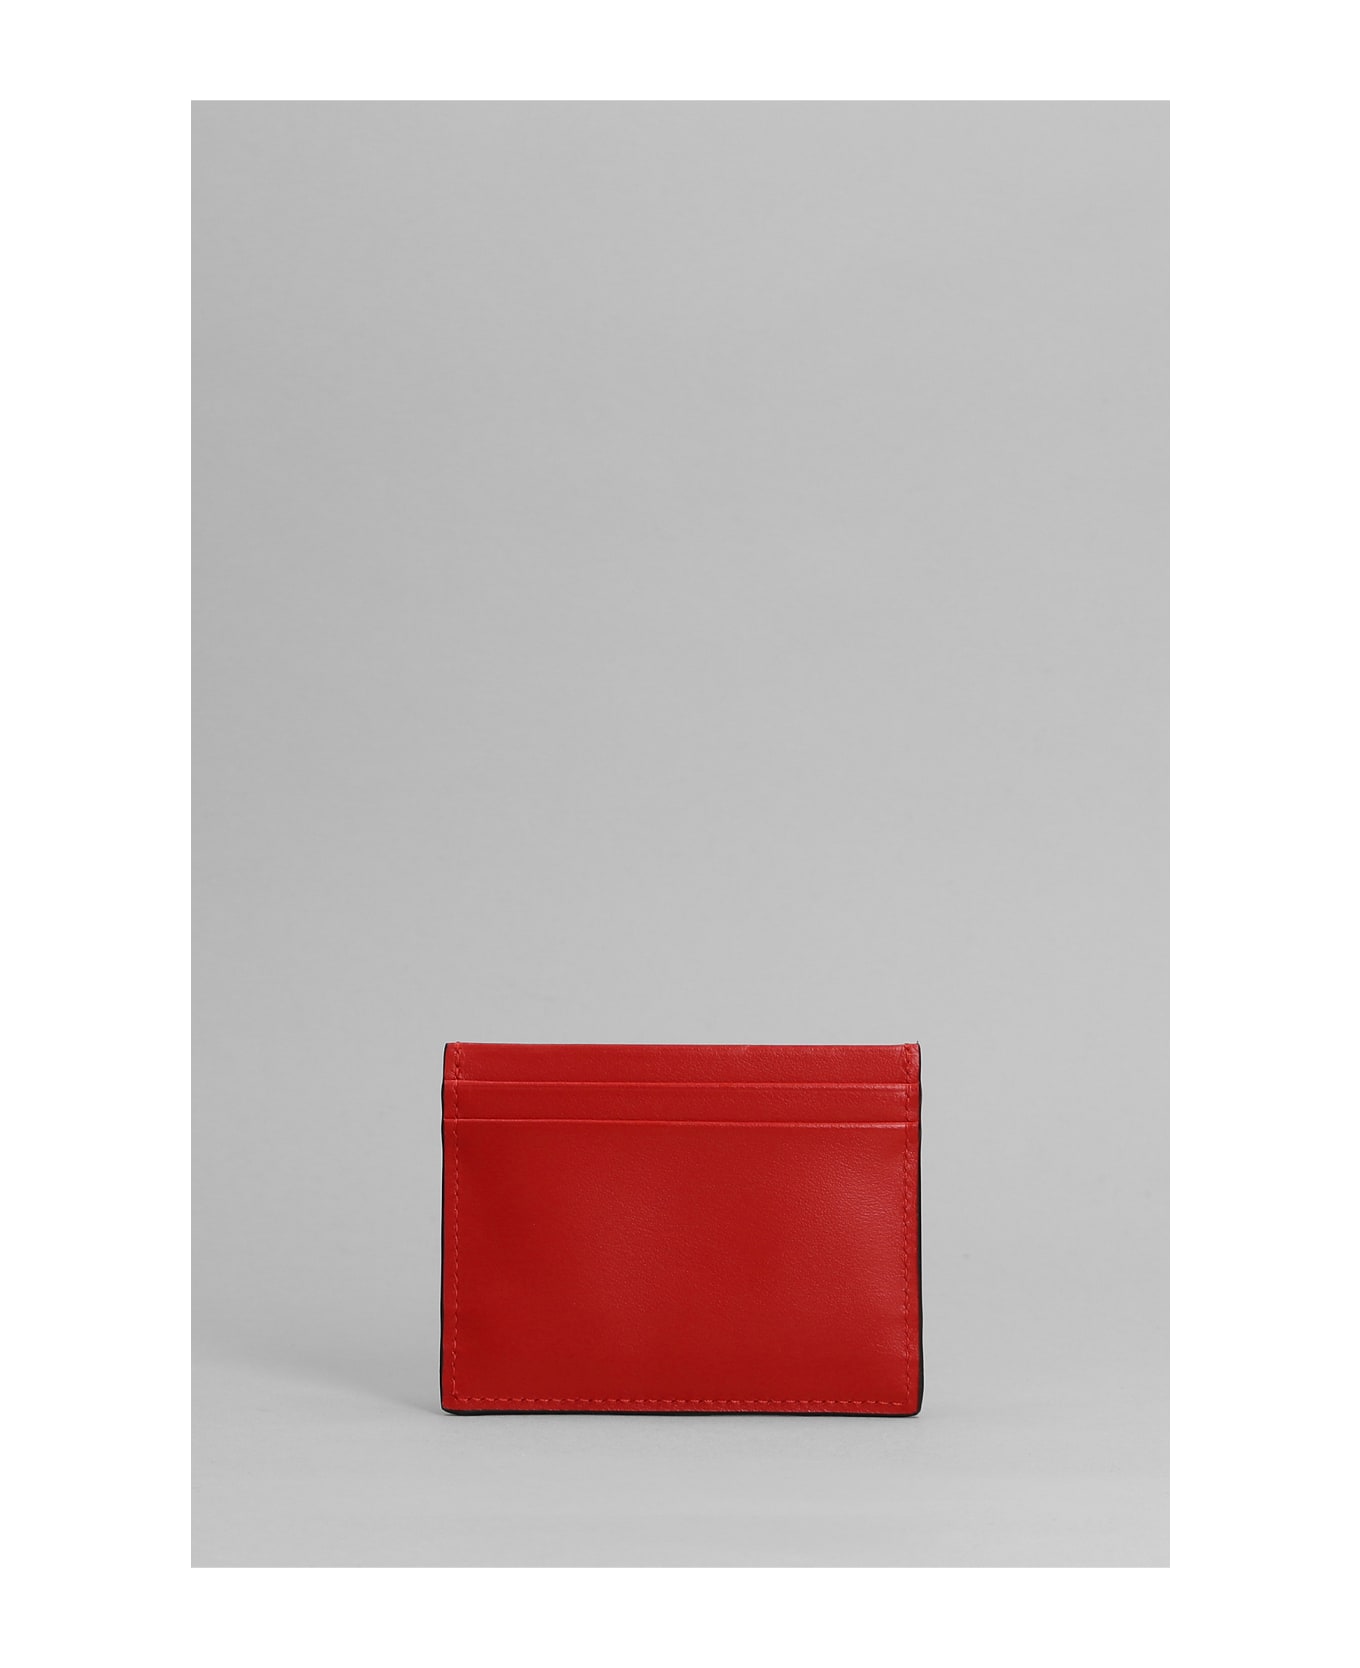 Christian Louboutin Wallet In Red Leather - red